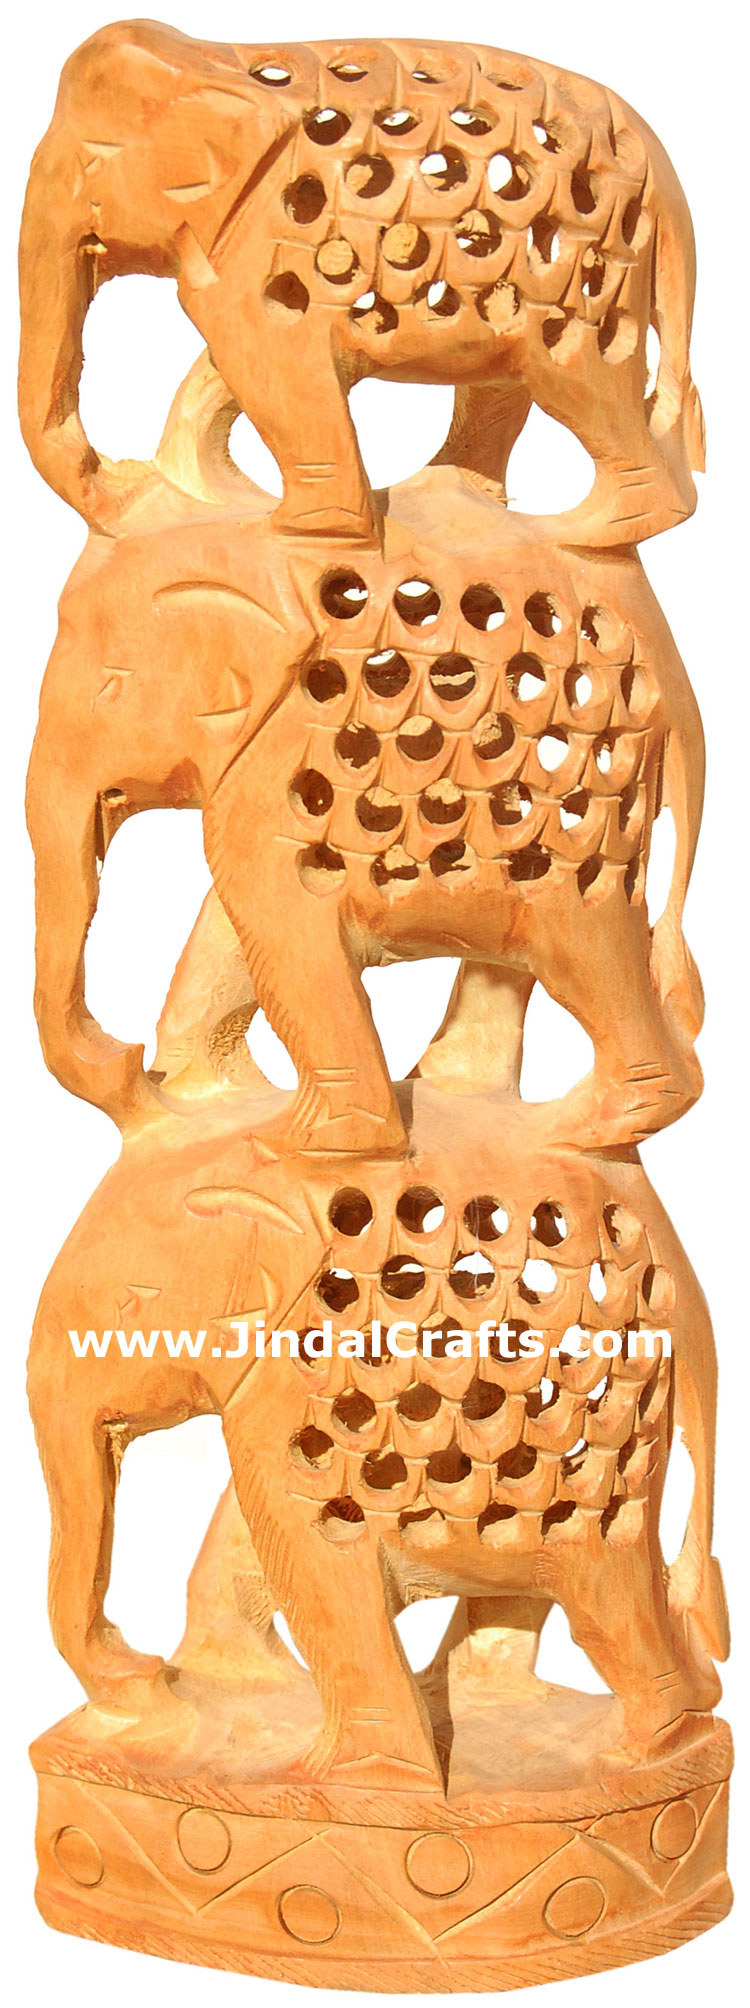 Hand Carved Wooden Elephant Tower India Artifacts Arts